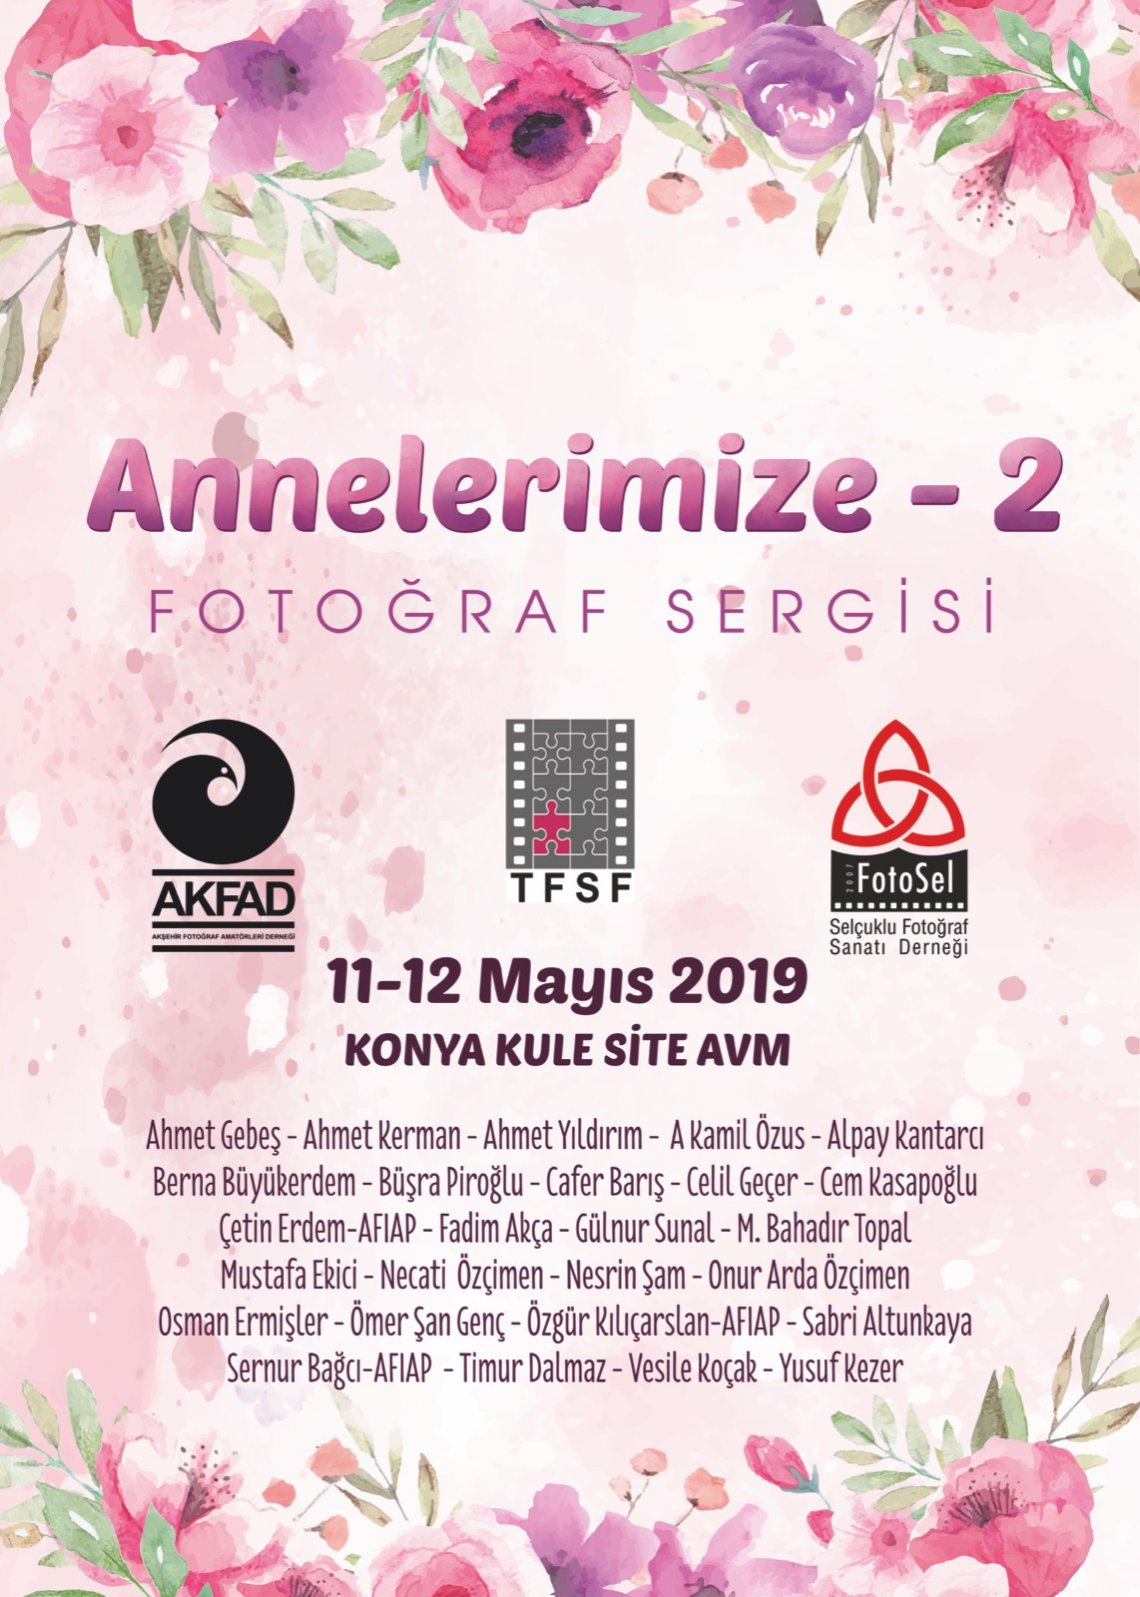 AKFAD&PHOTOSEL - 2 PHOTO EXHIBITIONS FOR OUR MOTHERS